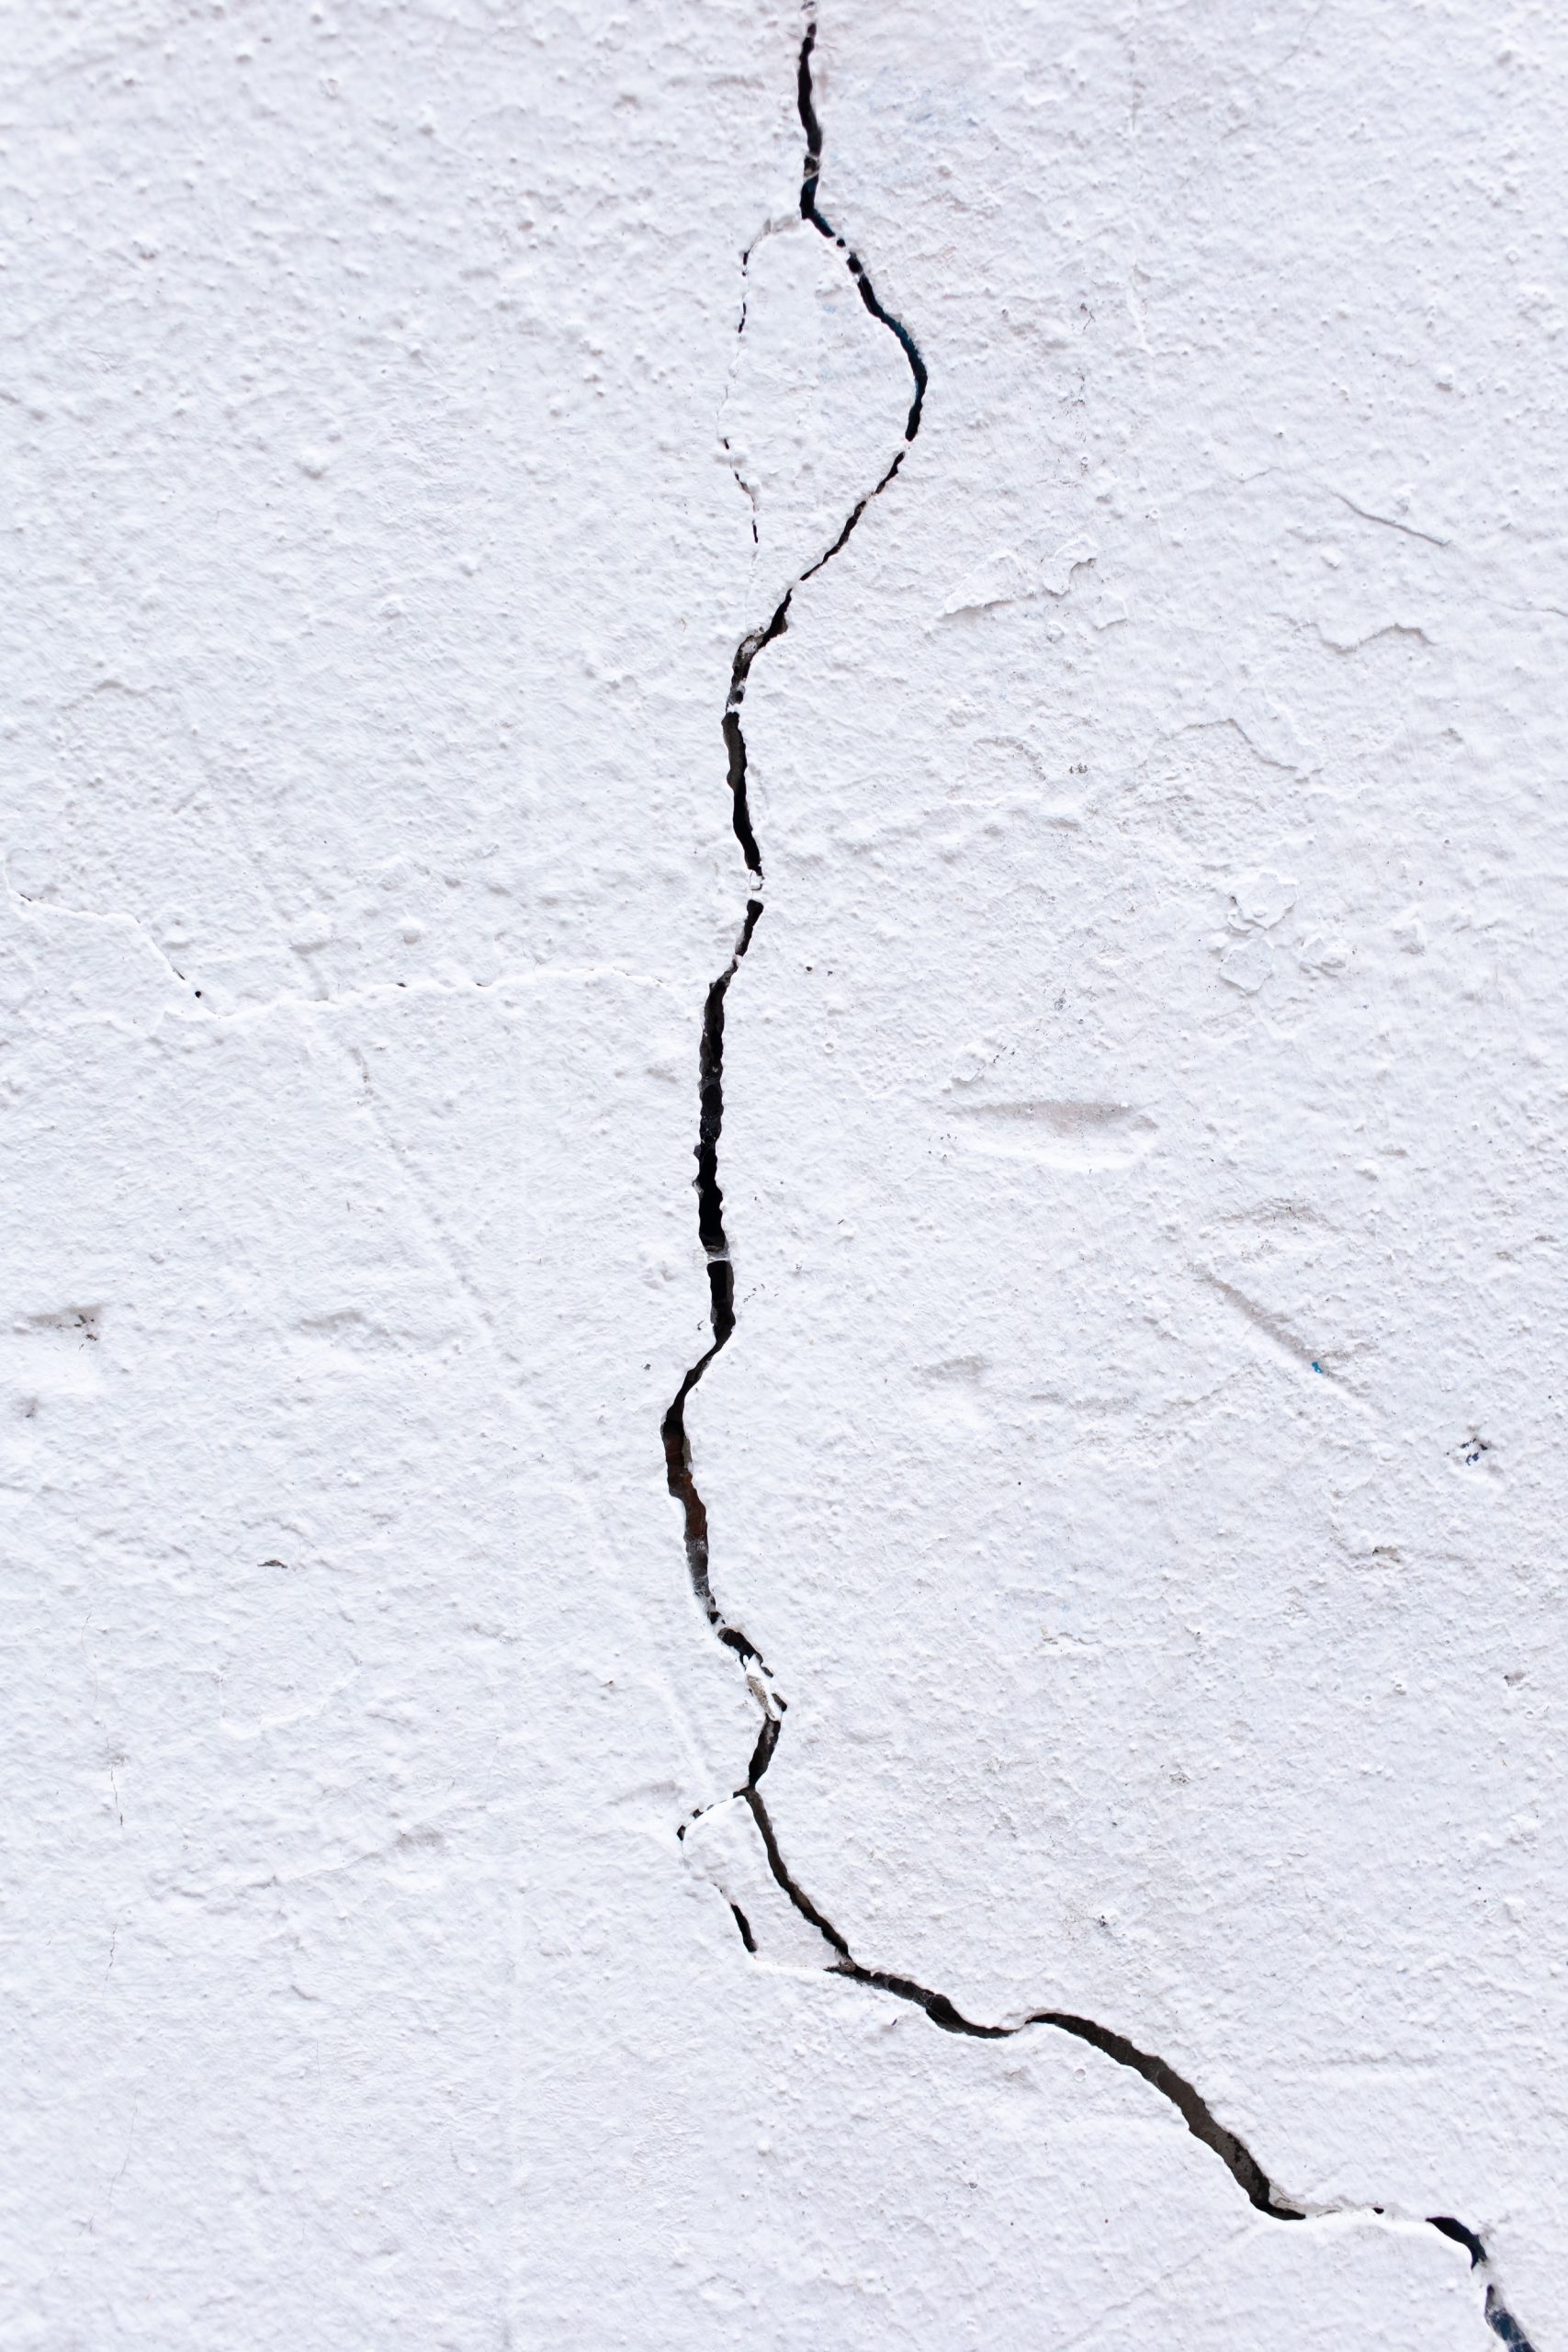 Cracks in the Foundation